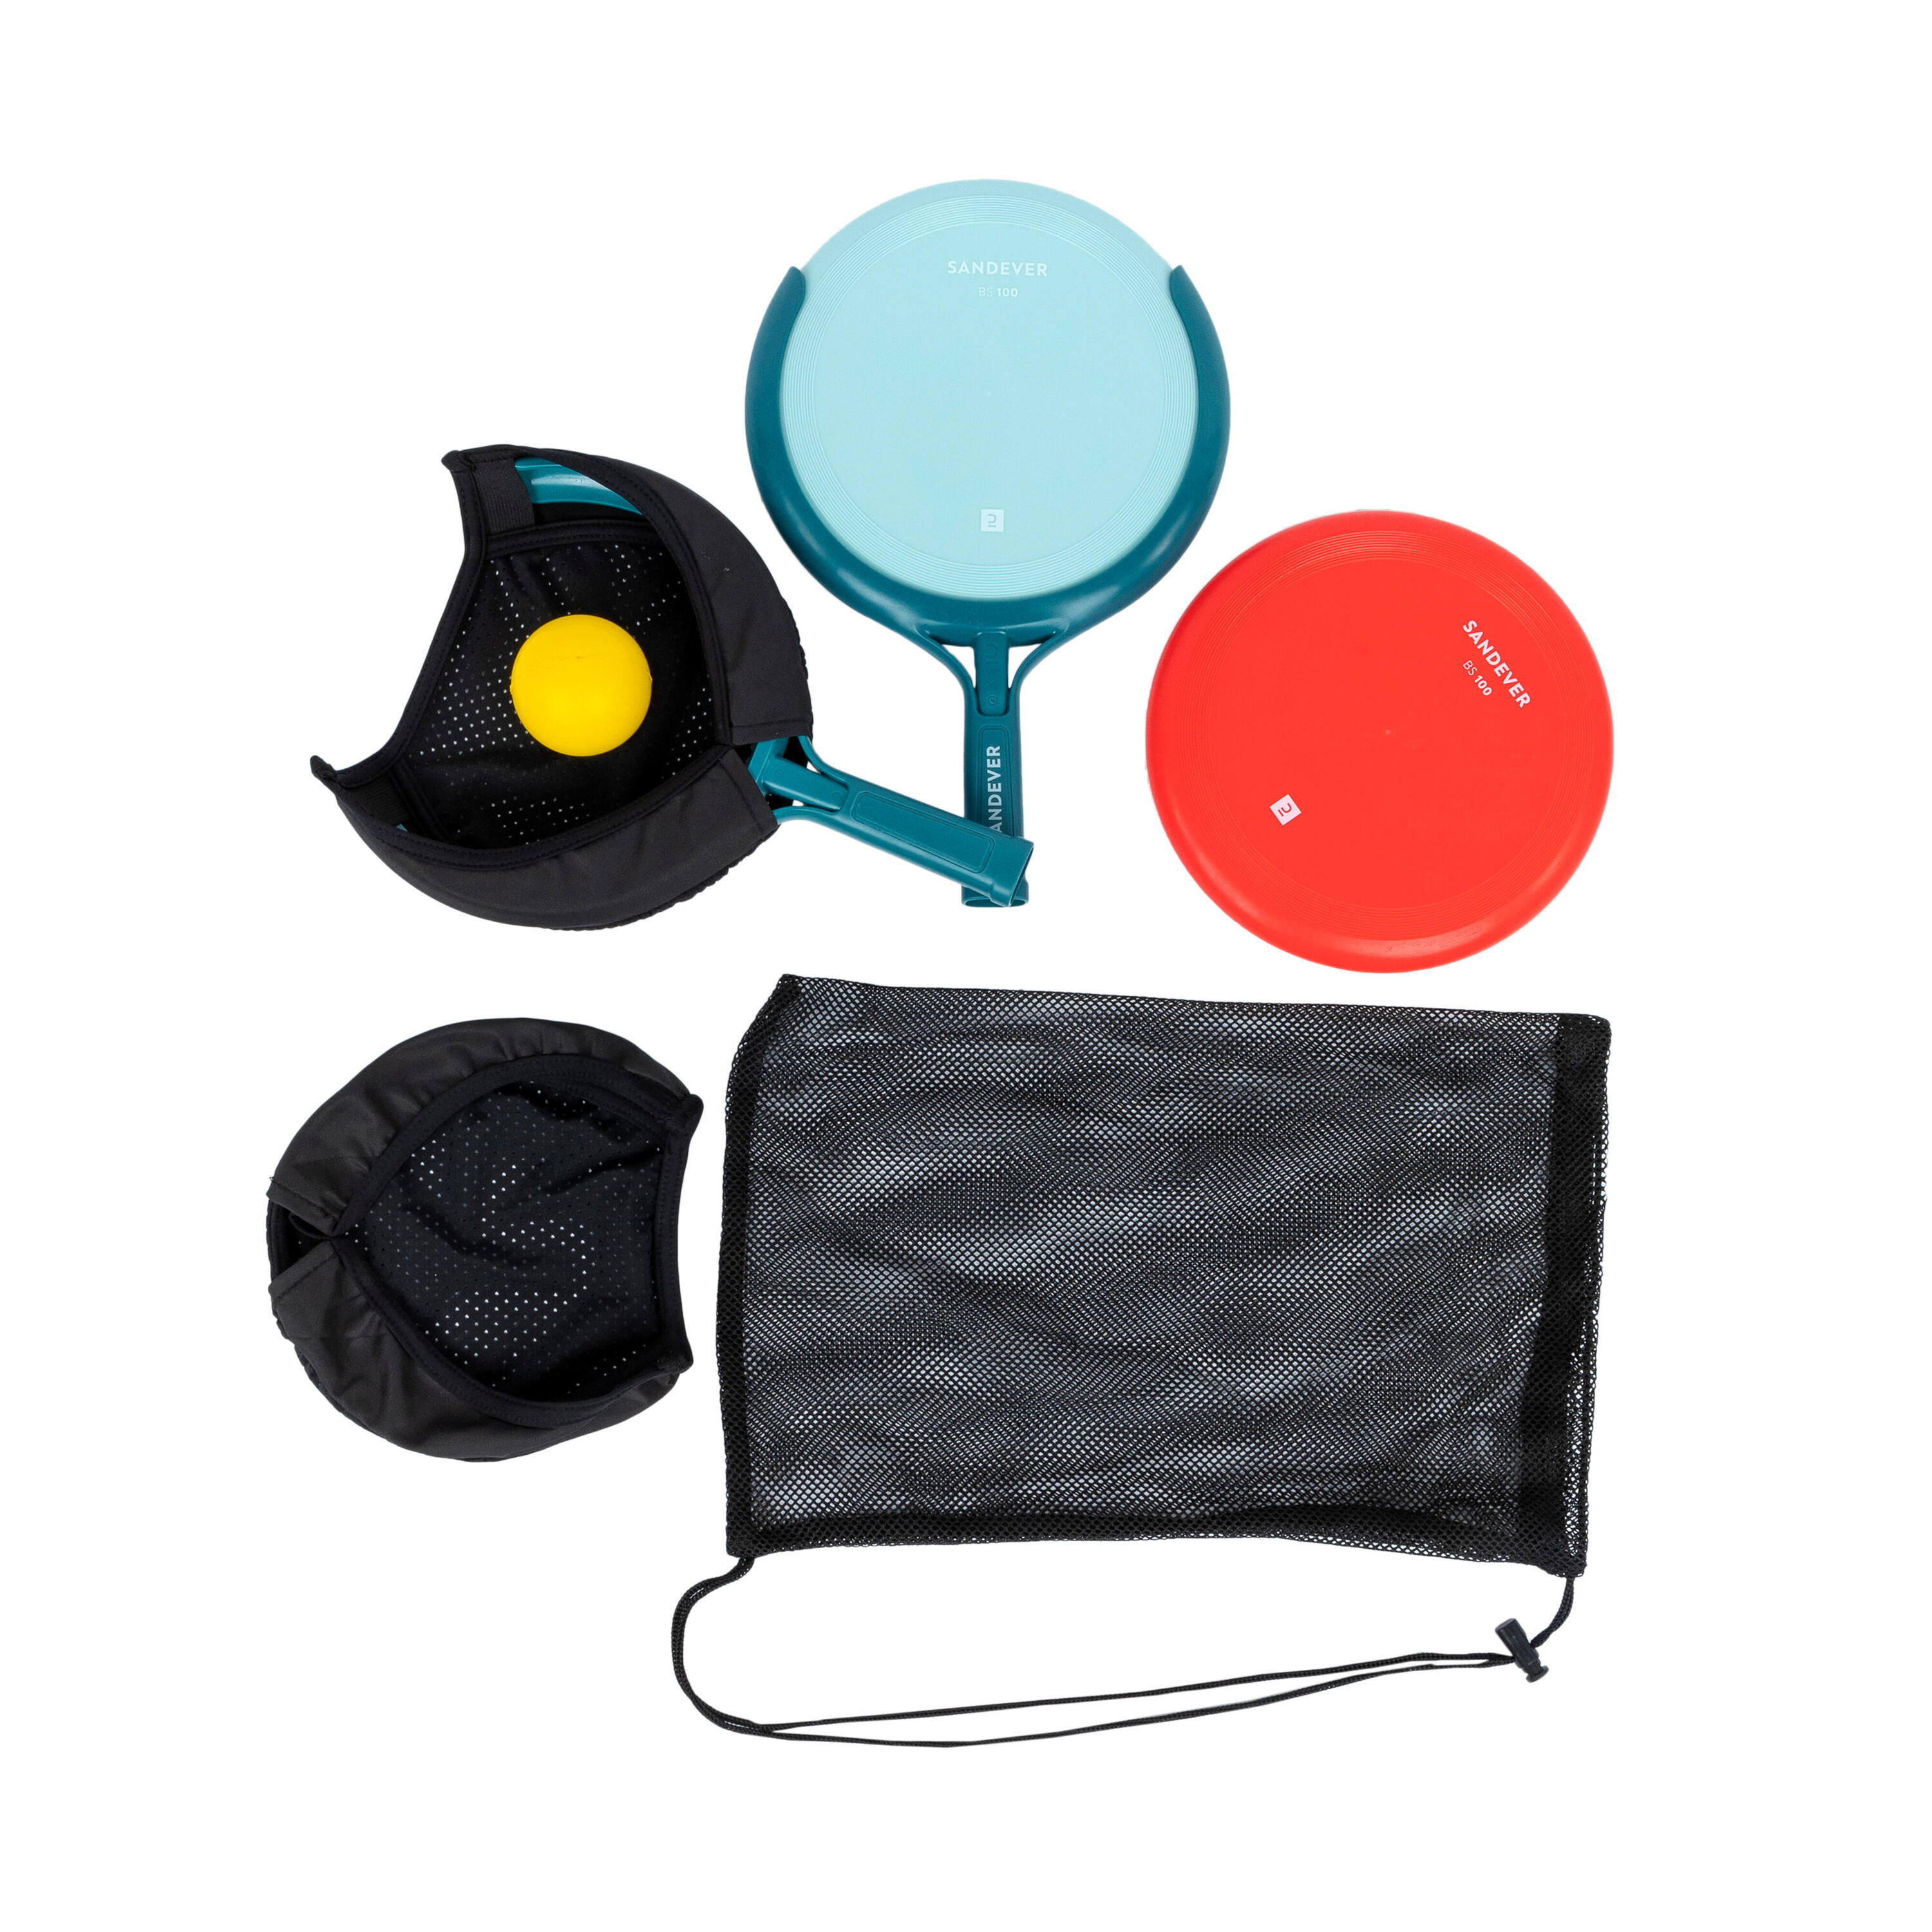 3-in-1 Game Set: flying discs/racket sports/ball catcher. 1/9